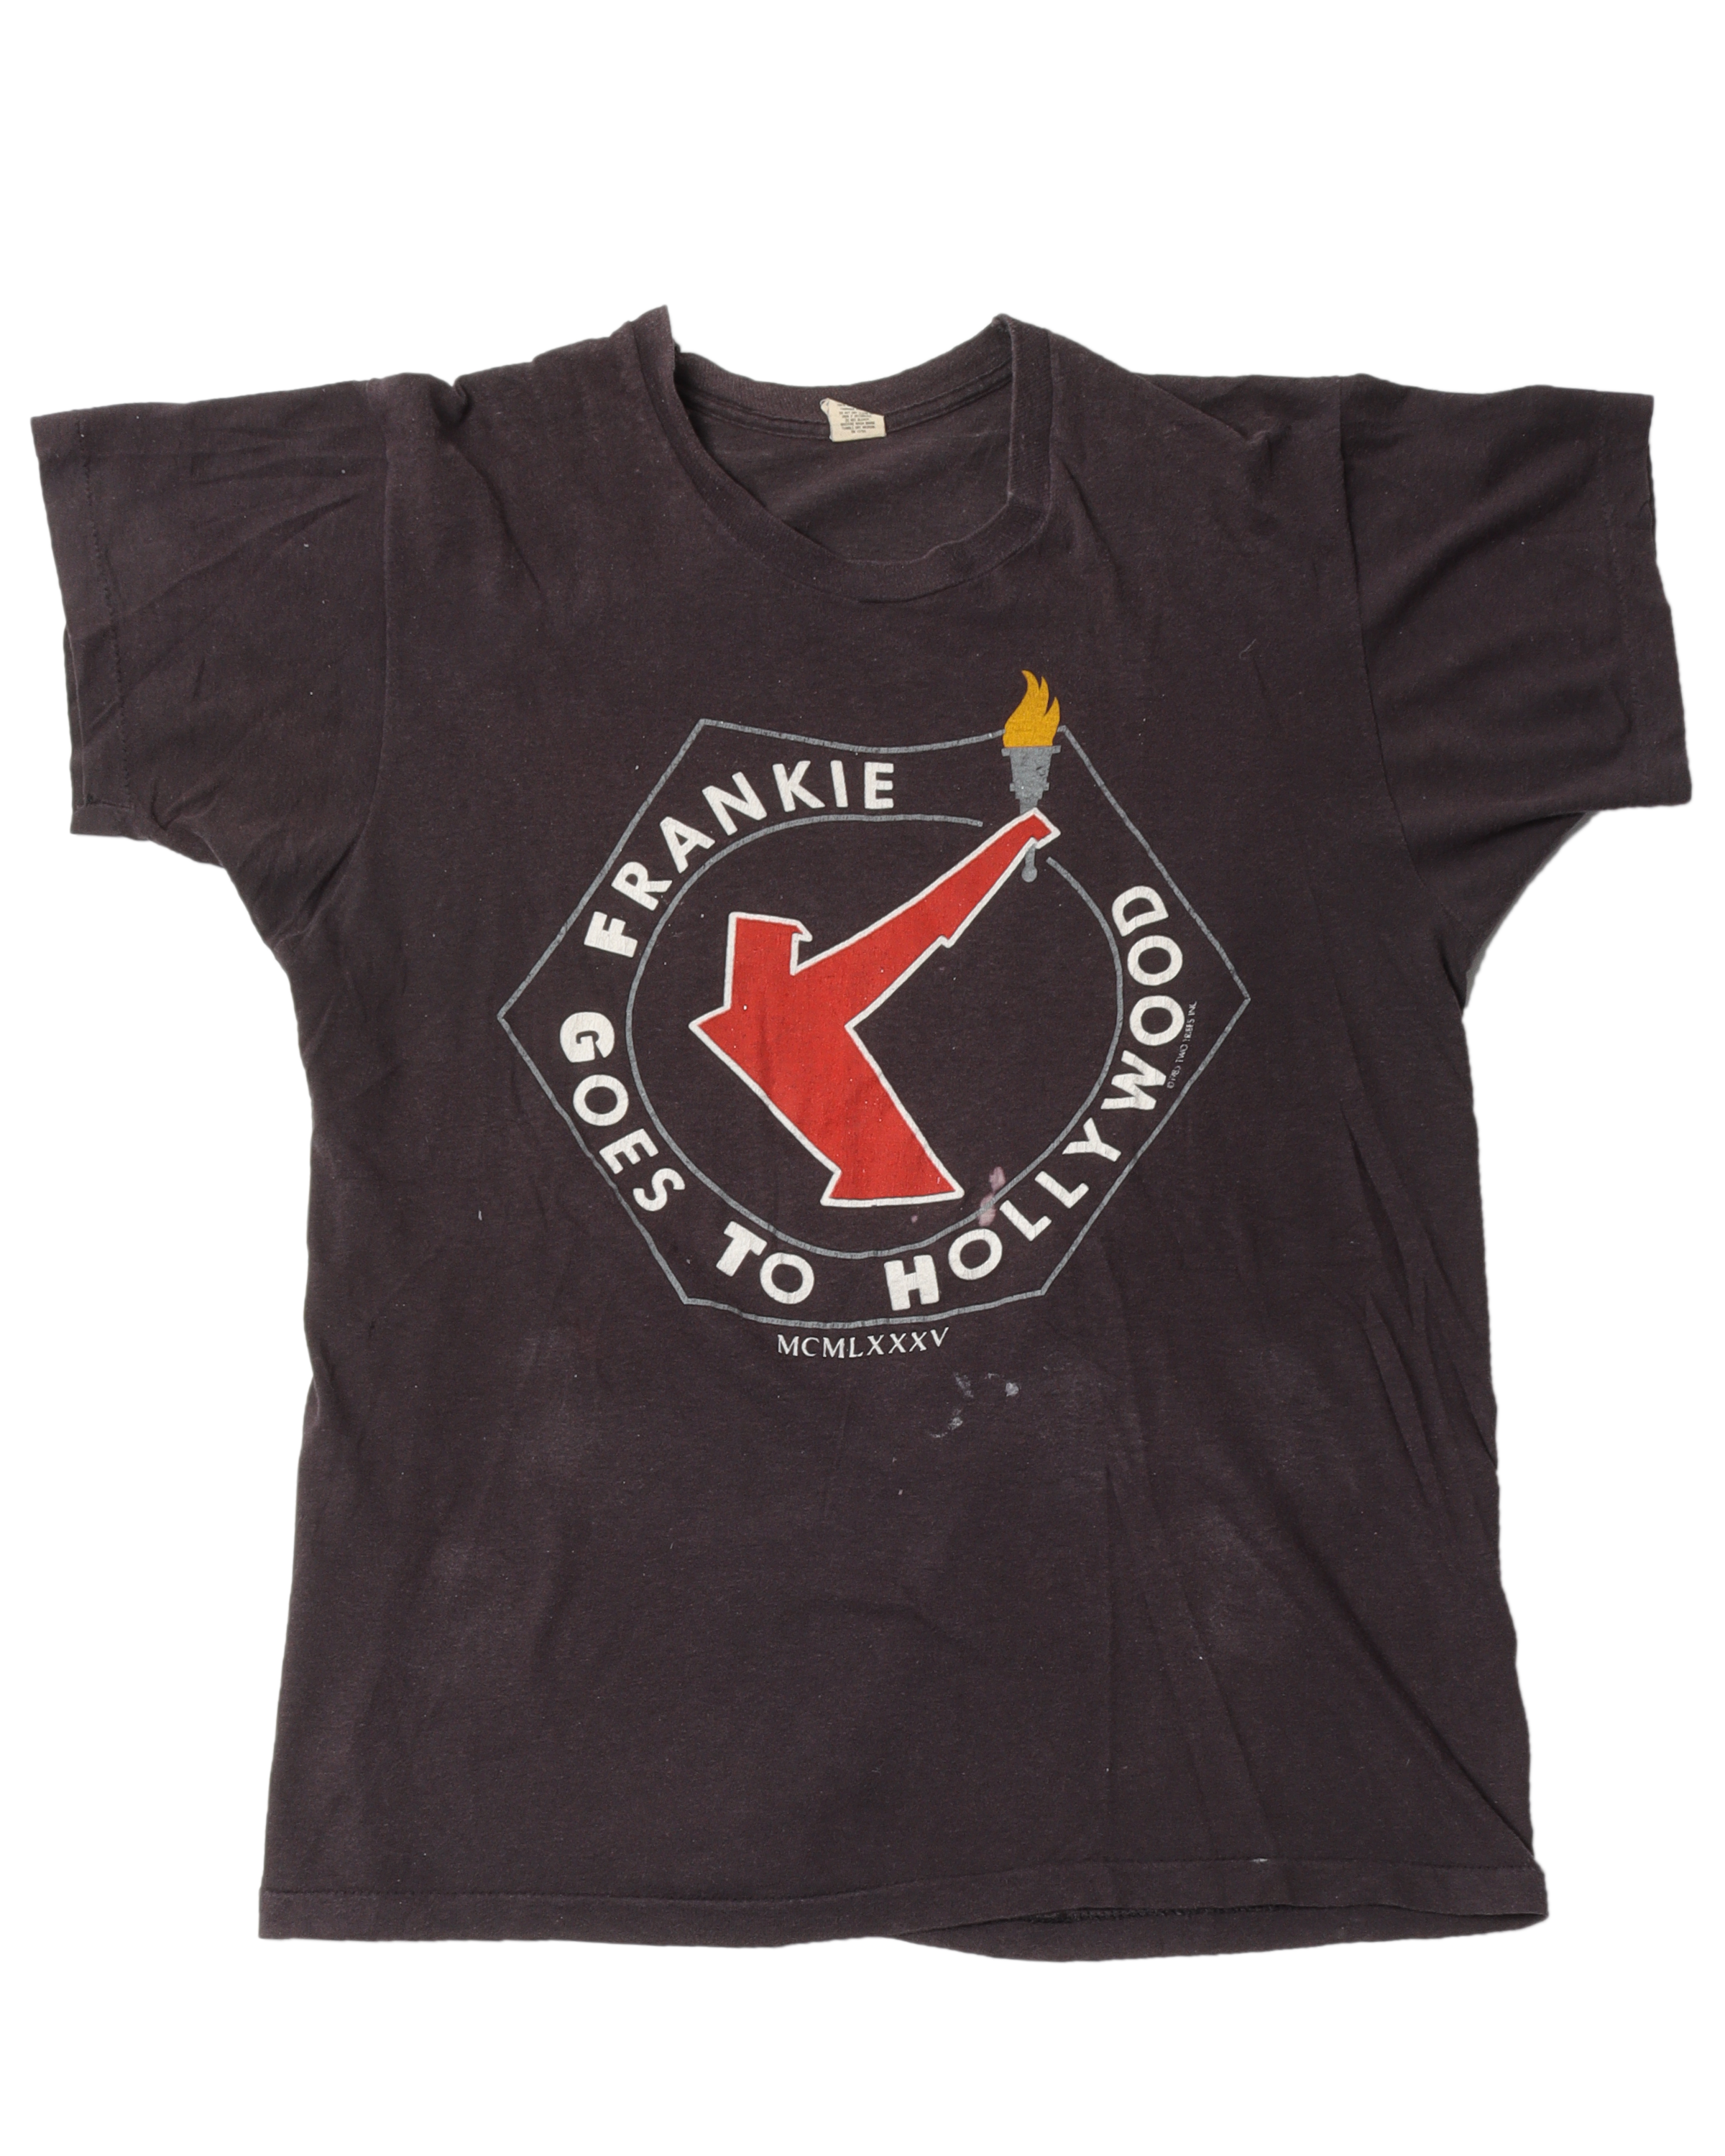 Frankie Goes To Hollywood T-Shirt